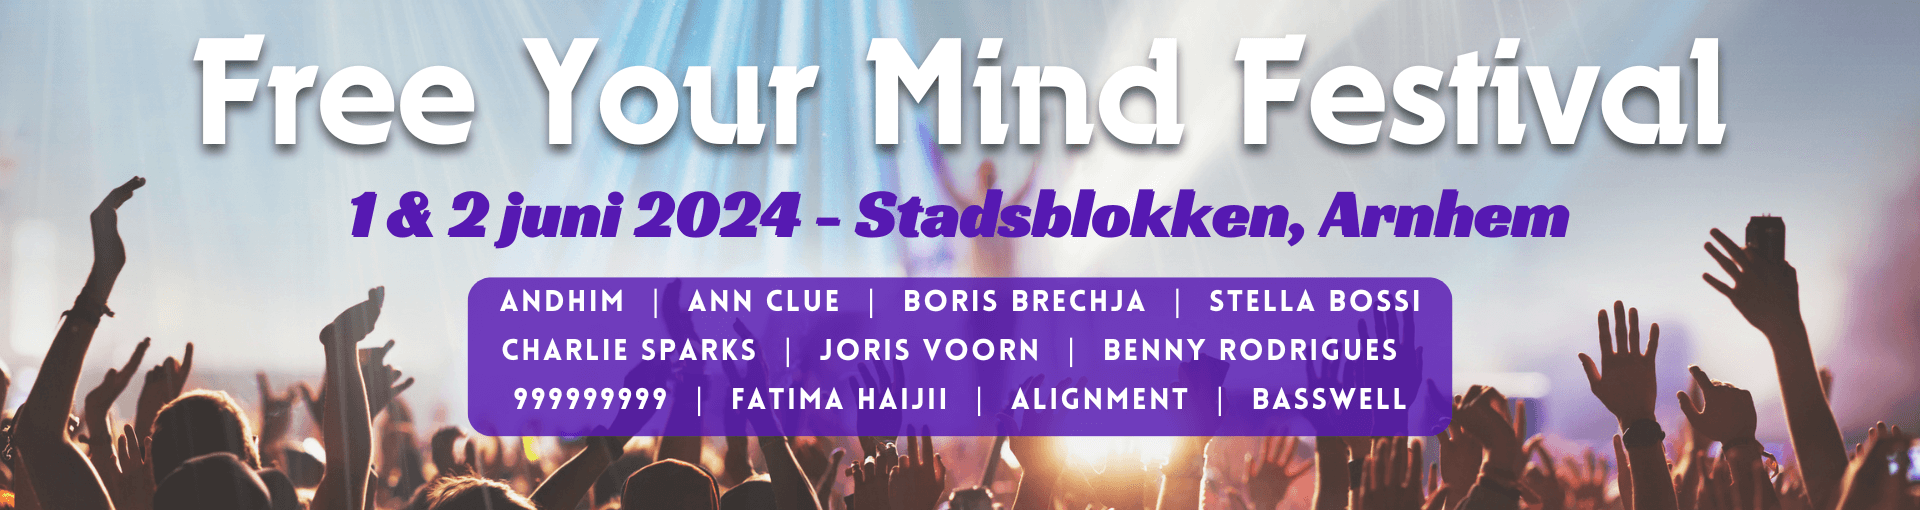 1920 x 510 Free Your Mind Festival